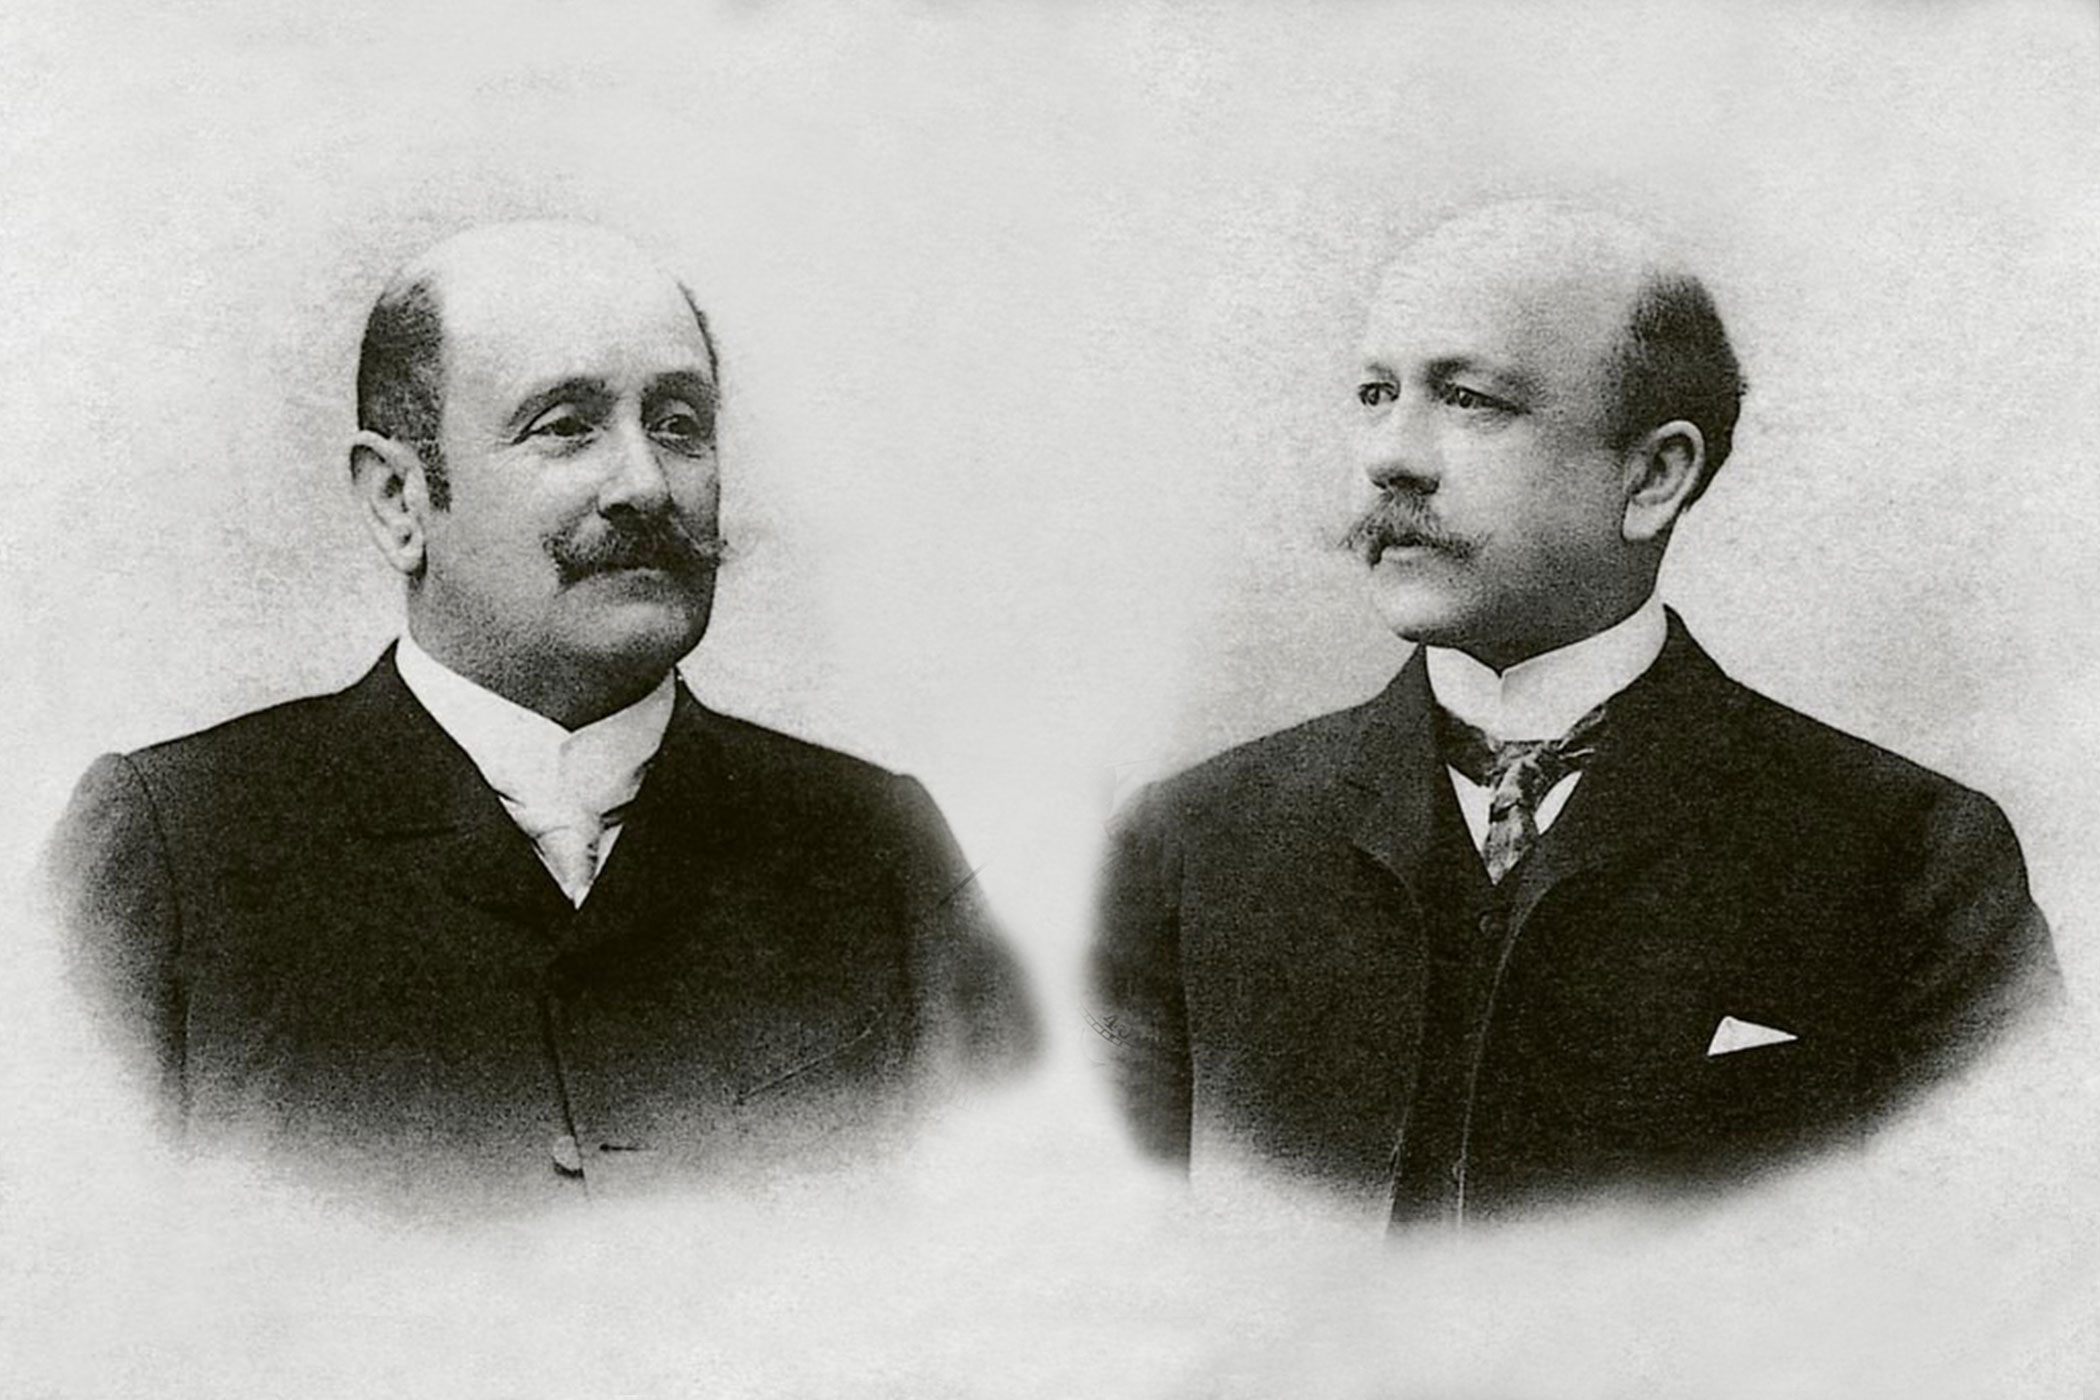 Louis Brandt, the Heritage of the Master Watchmaker Before OMEGA's Birth